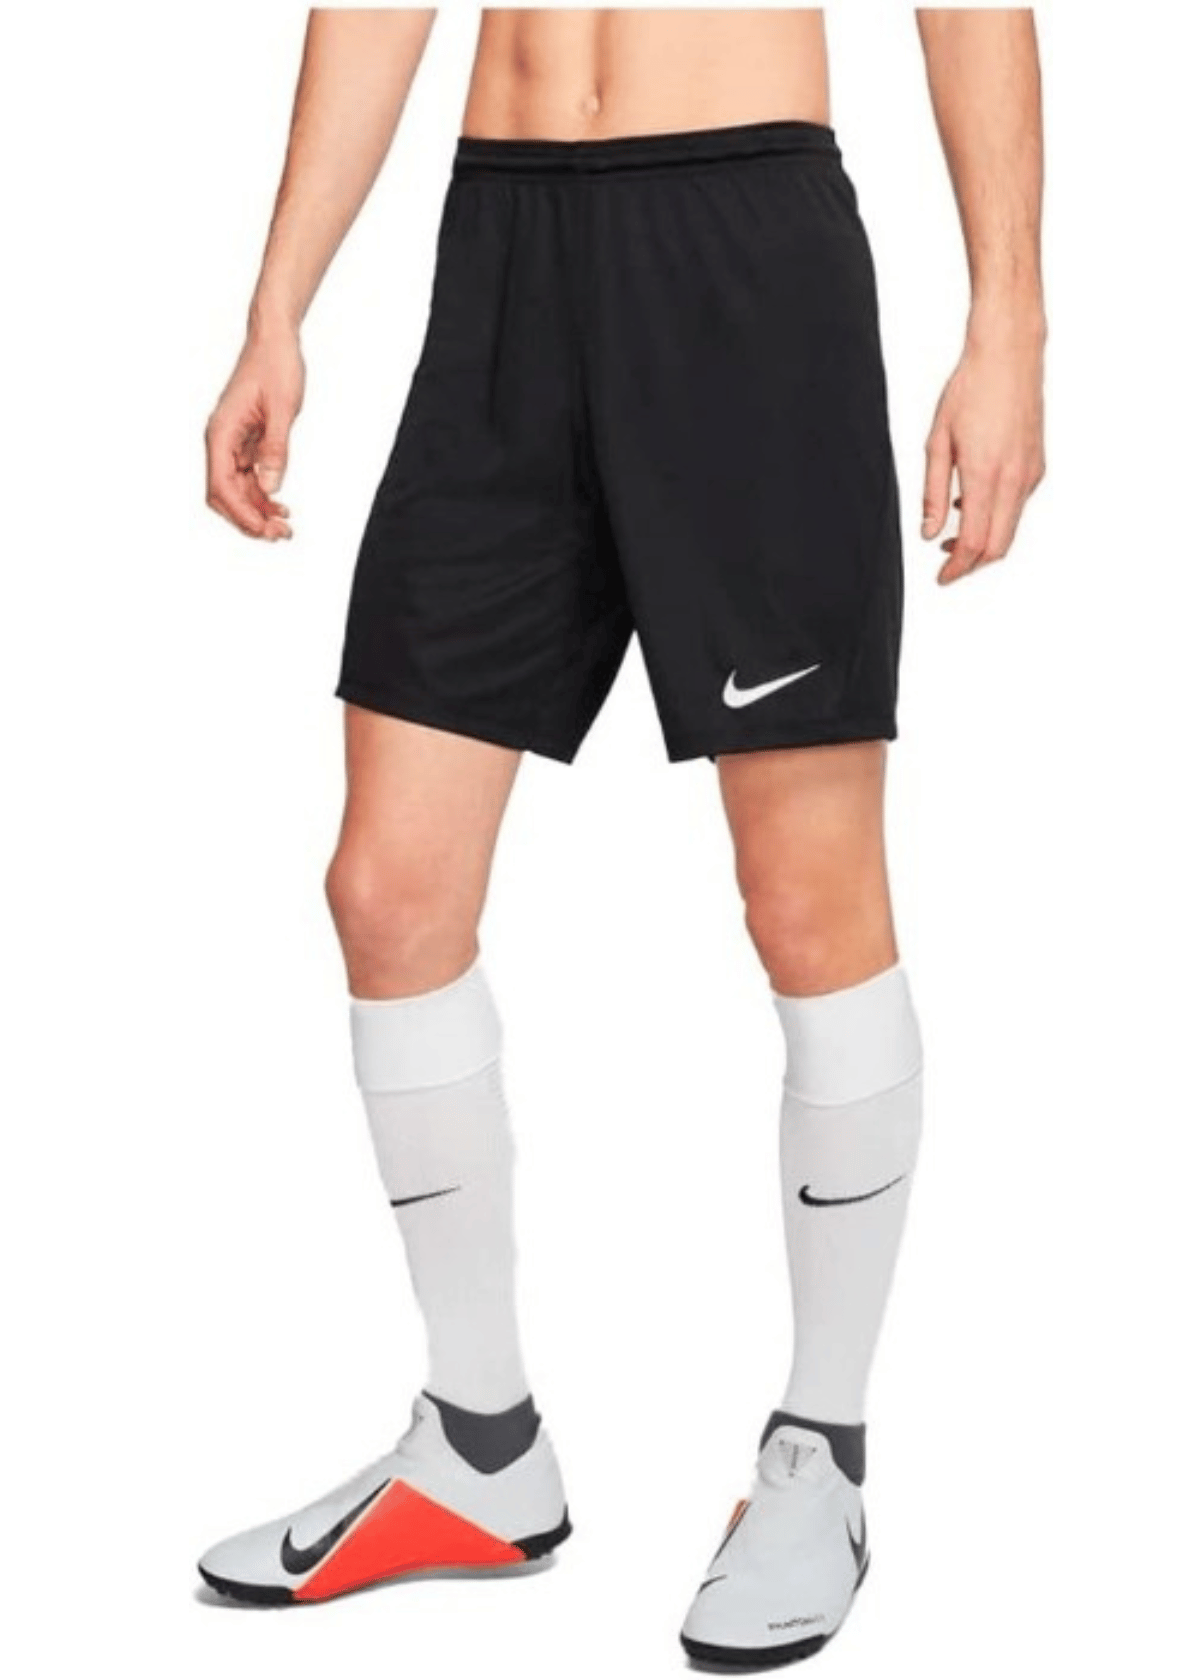 The Best Black Soccer Shorts Money Can Buy